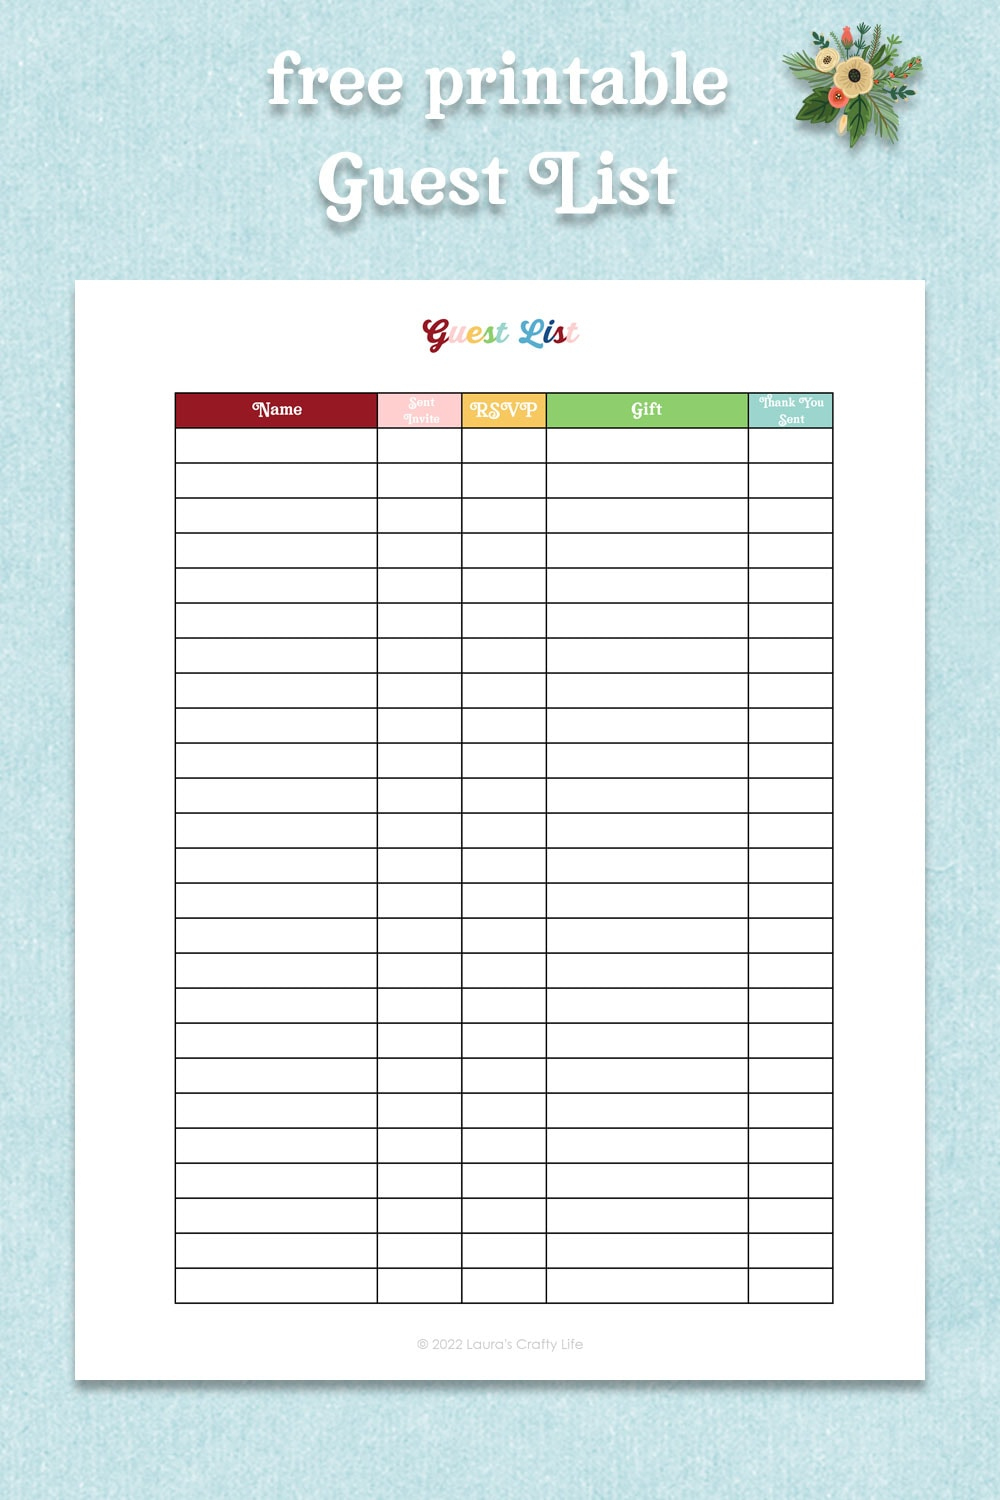 Printable Guest List with Free Printable Birthday Guest List